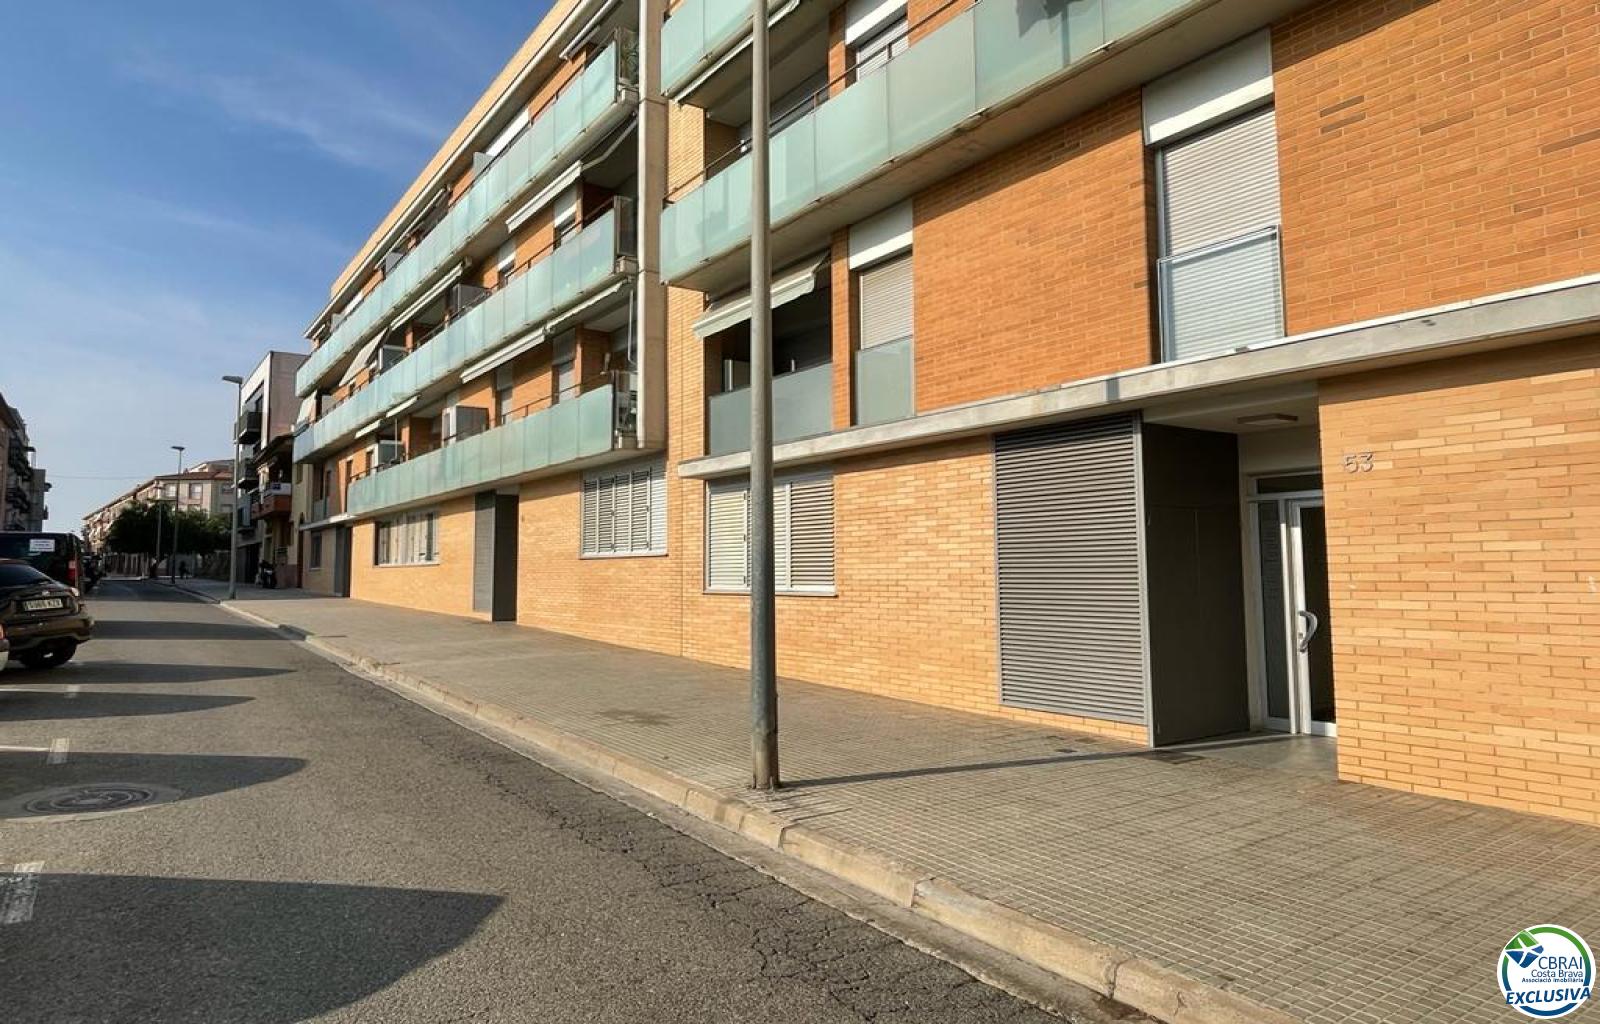 RECENTLY CONSTRUCTED APARTMENT IN THE CENTER CLOSE TO THE PLAY AND ALL THE VILLAGE'S SERVICES, 2 BEDROOMS, 1 OR 2 OPTIONAL UNDERGROUND PARKING SPACES